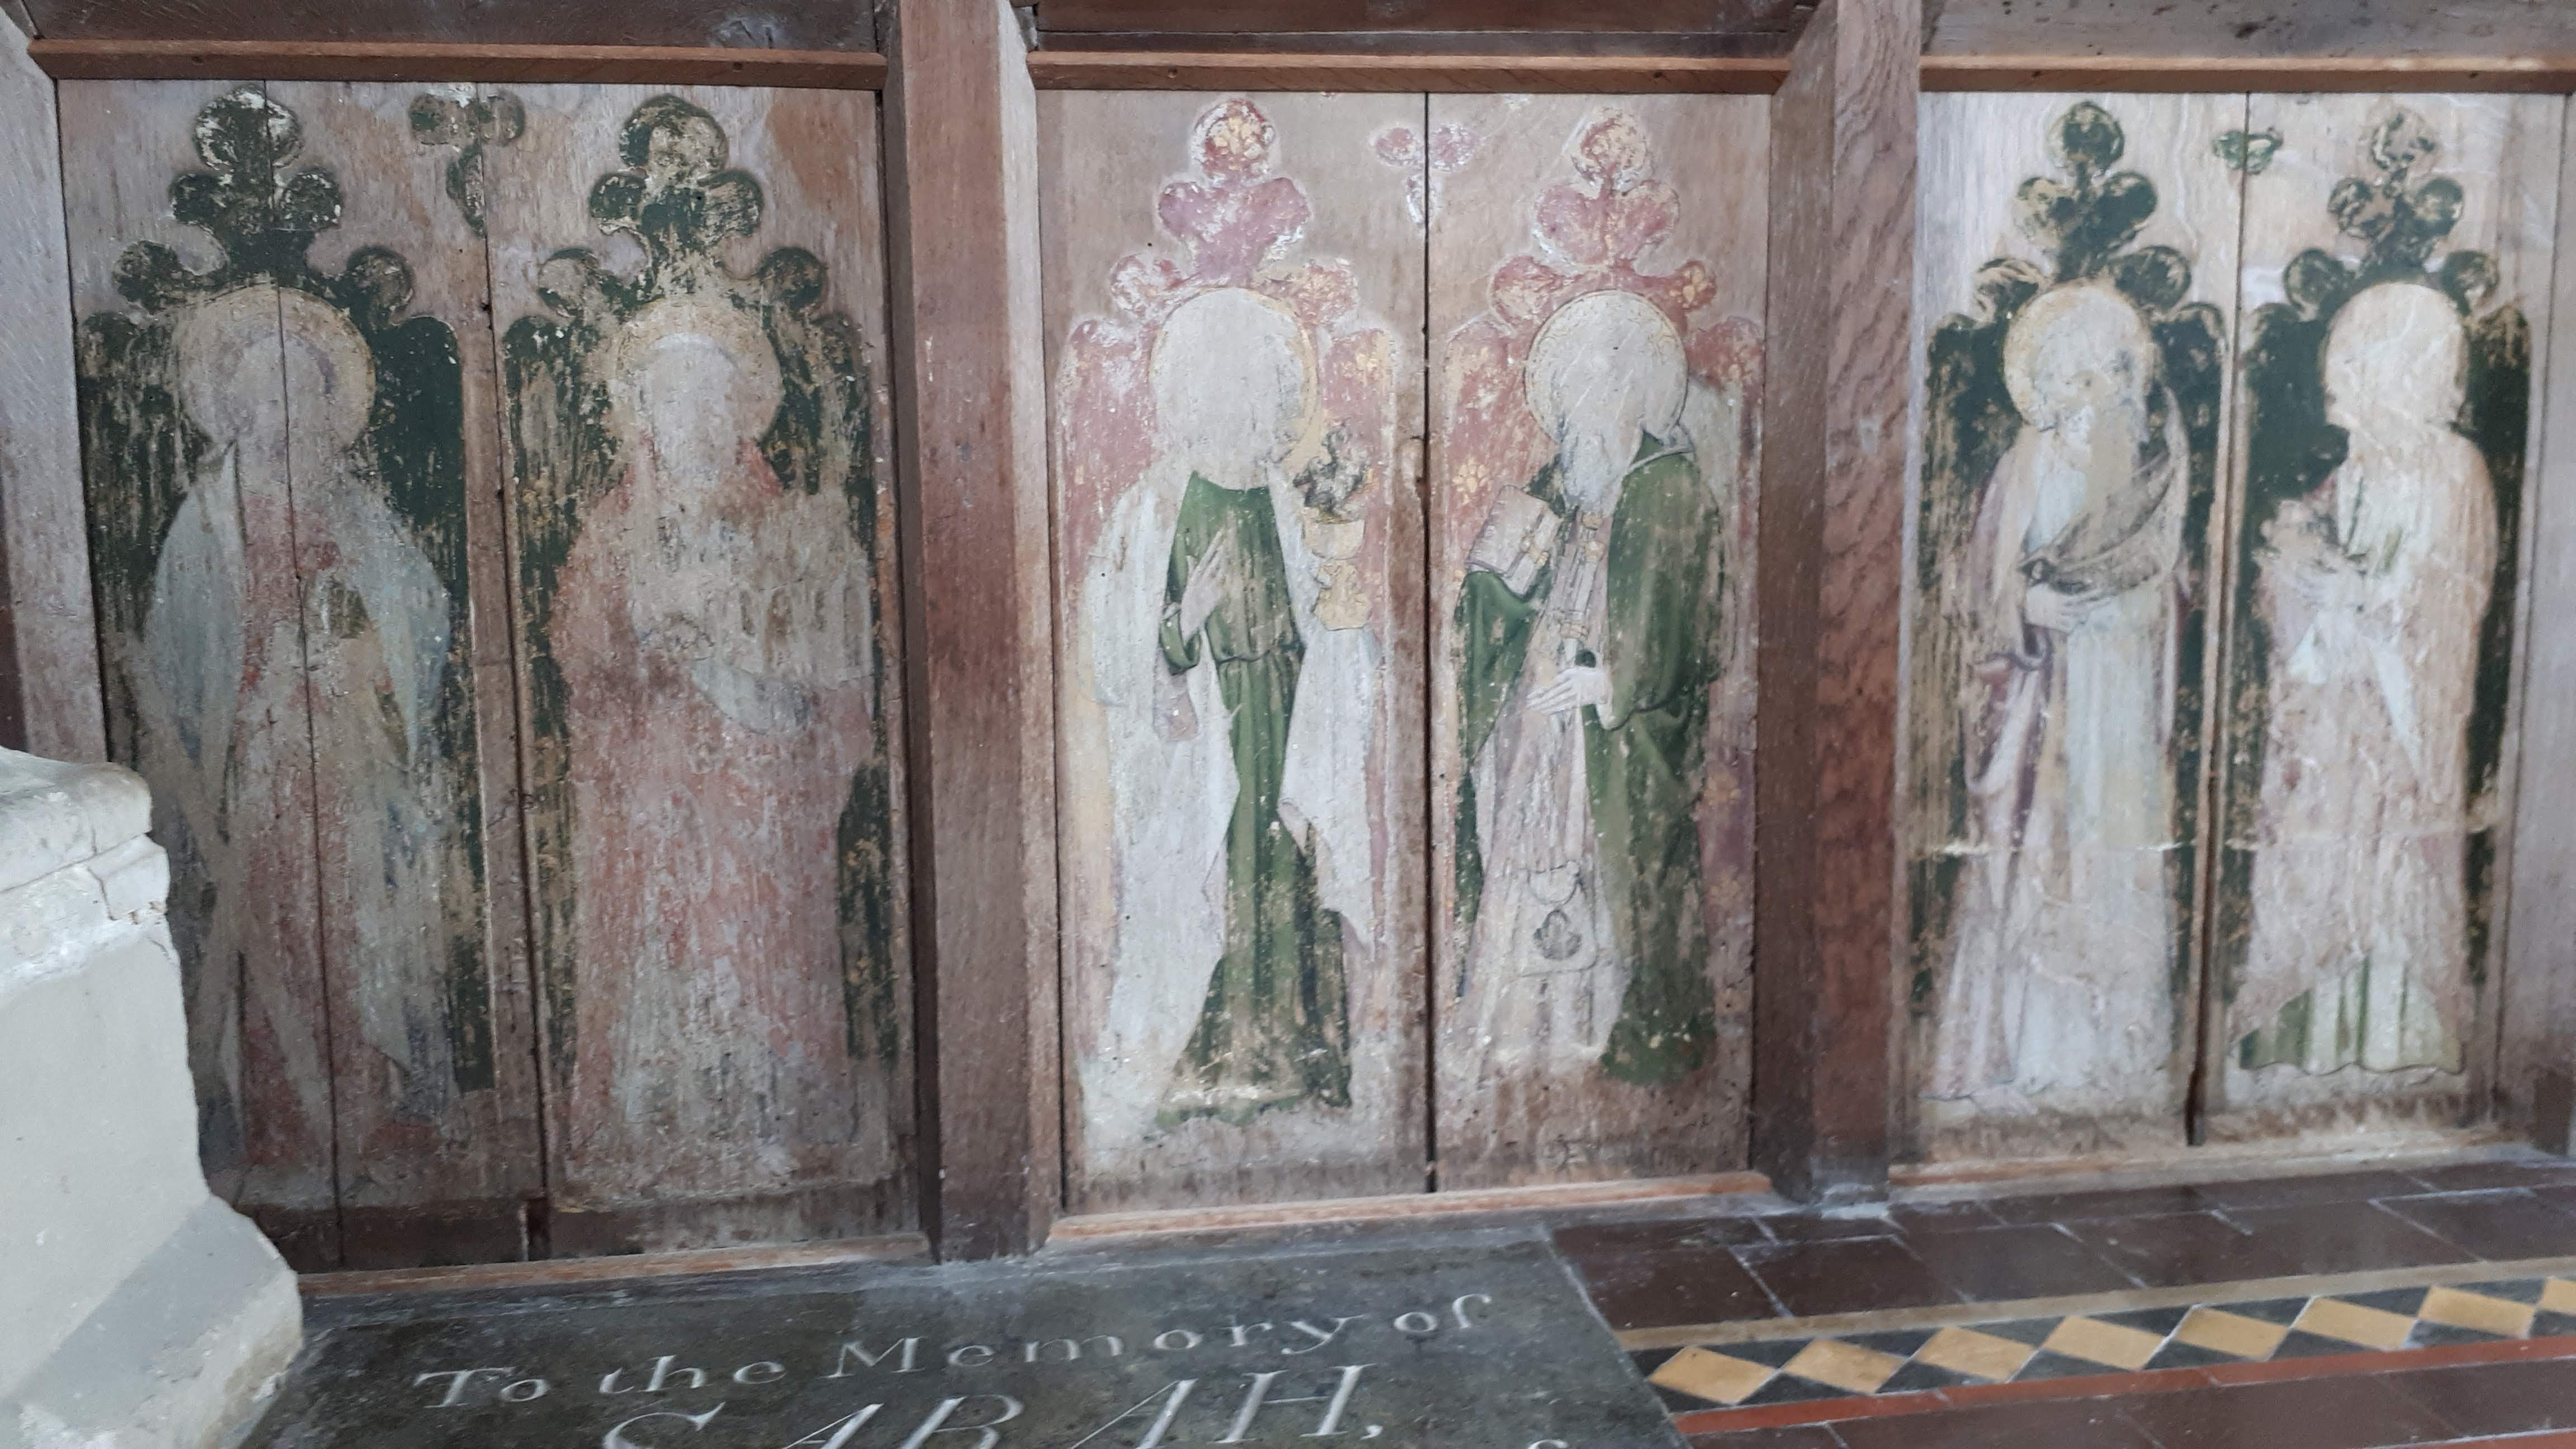 15th century rood screen icons in the church of St Michael, Swanton Abbott